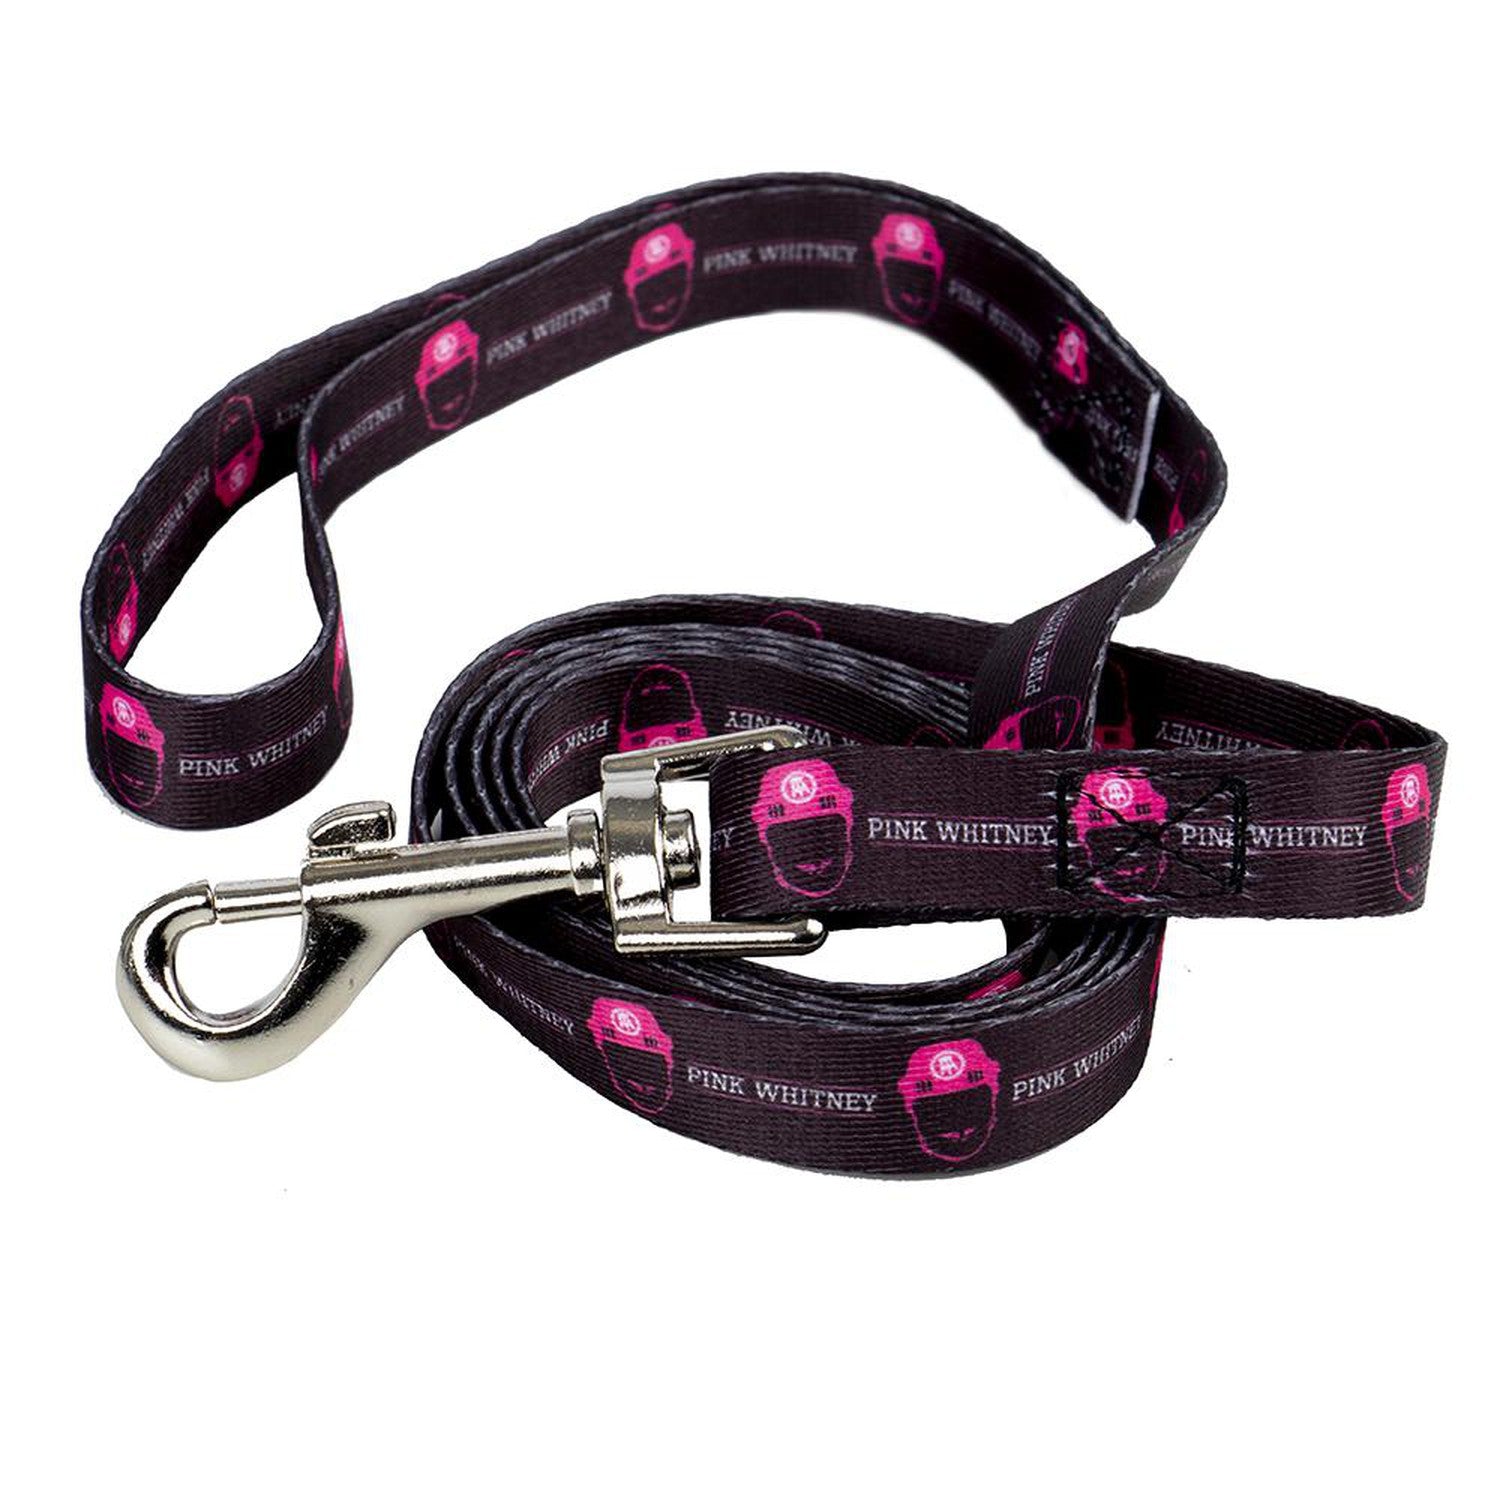 Pets First Pittsburgh Pirates Pet Leash - Large